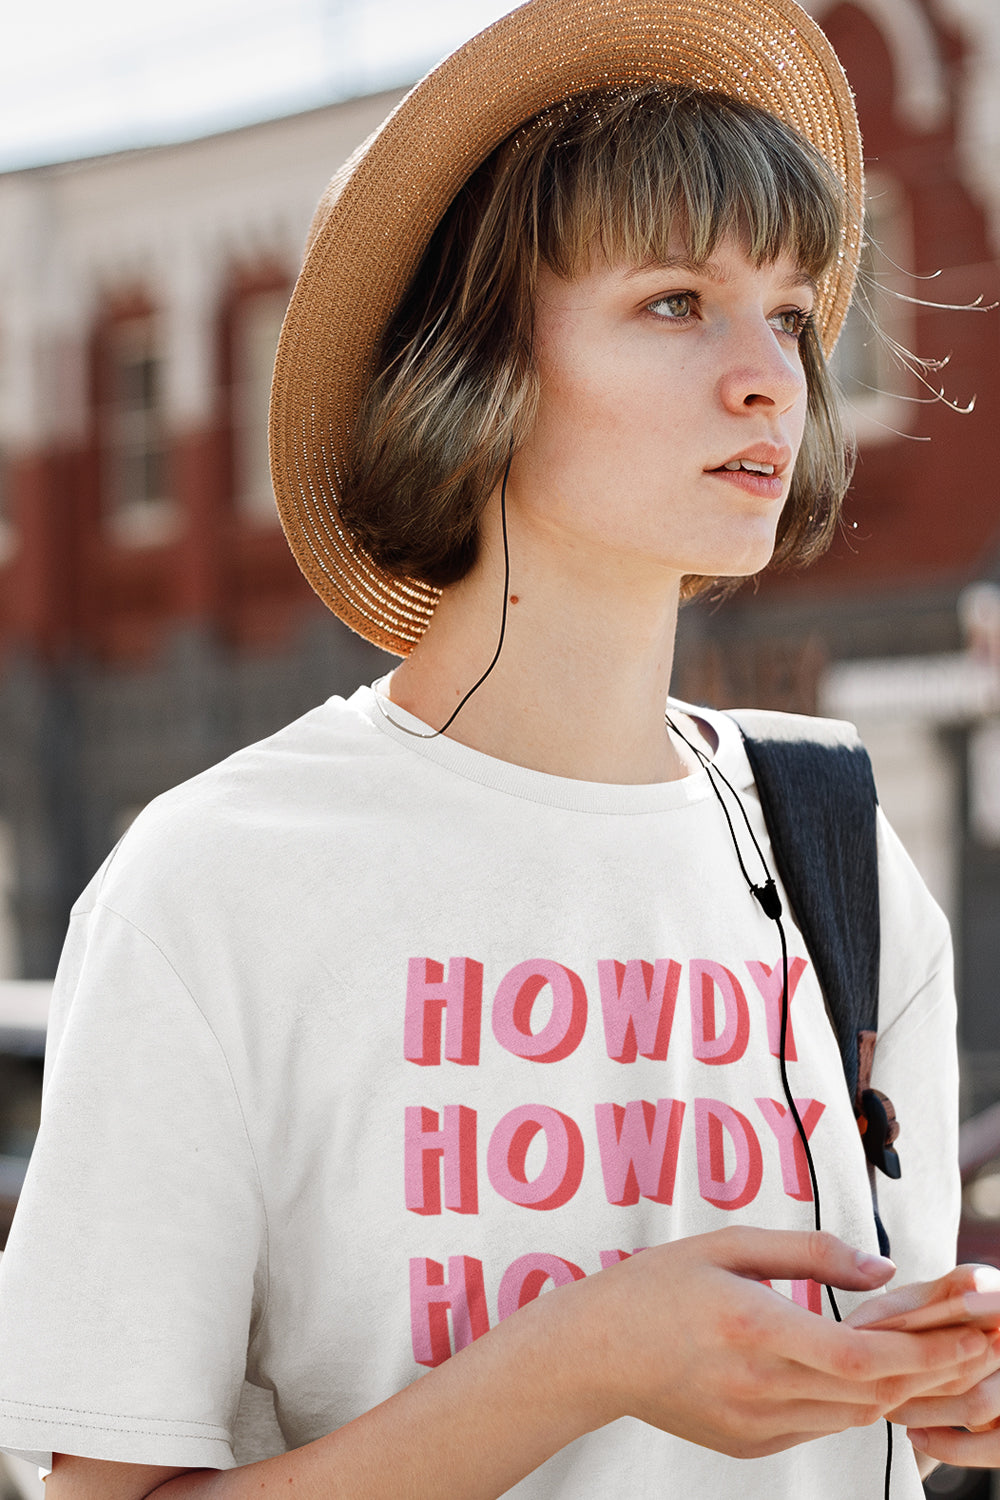 Howdy Shirt - Pink and Red